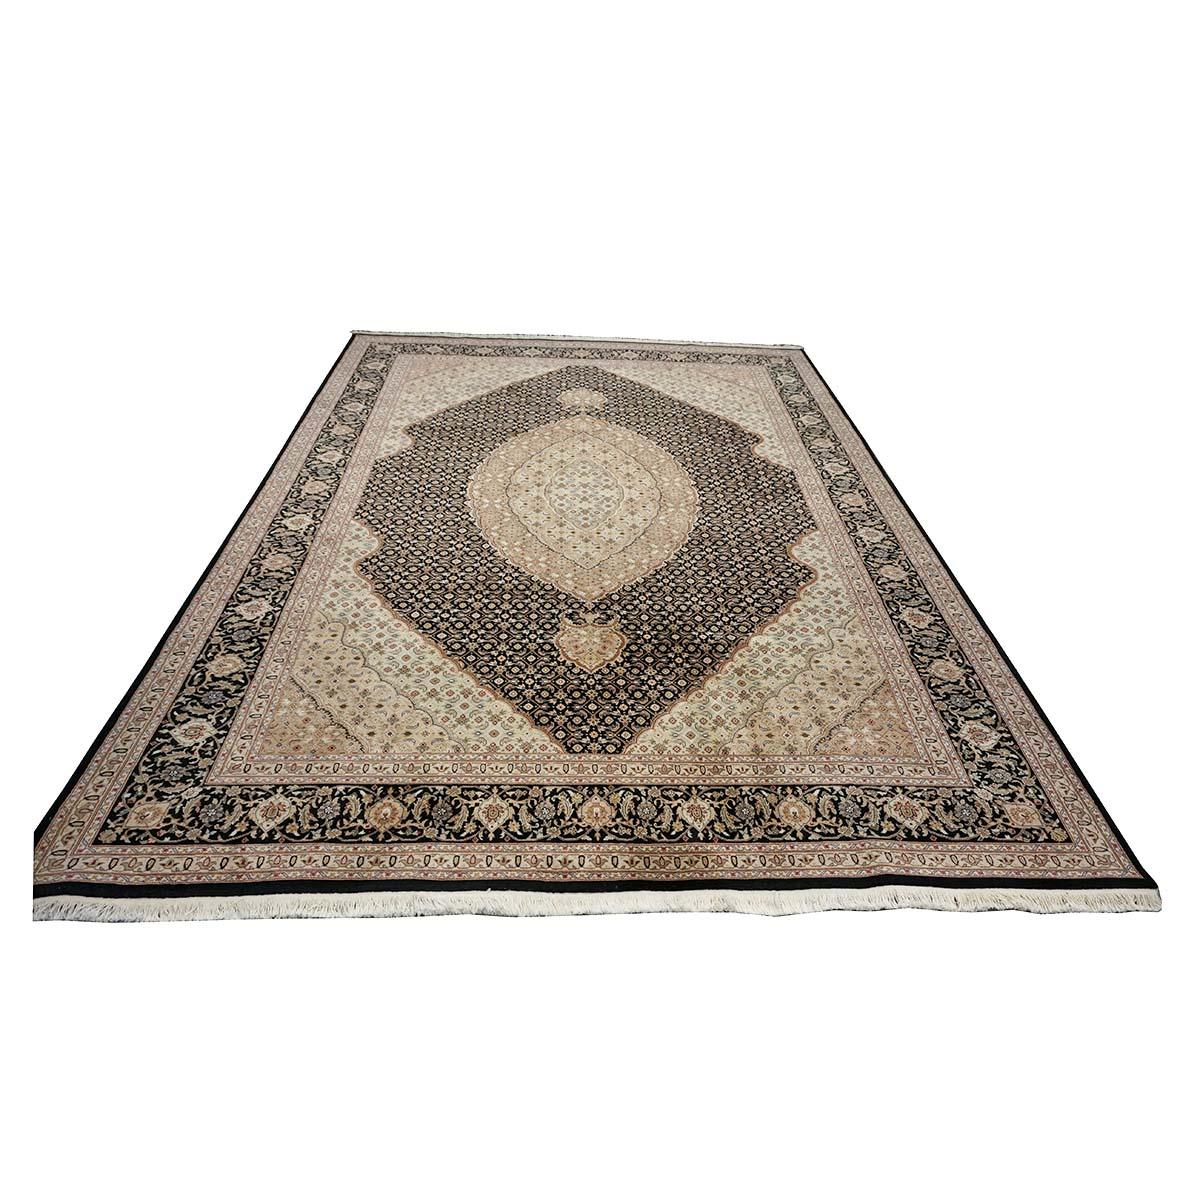  Ashly Fine Rugs presents a 1980s Vintage Sino-Persian Tabriz Mahi 9x12 Handmade Rug. Tabriz is a northern city in modern-day Iran and has forever been famous for the fineness and craftsmanship of its handmade rugs. Over the years, many countries